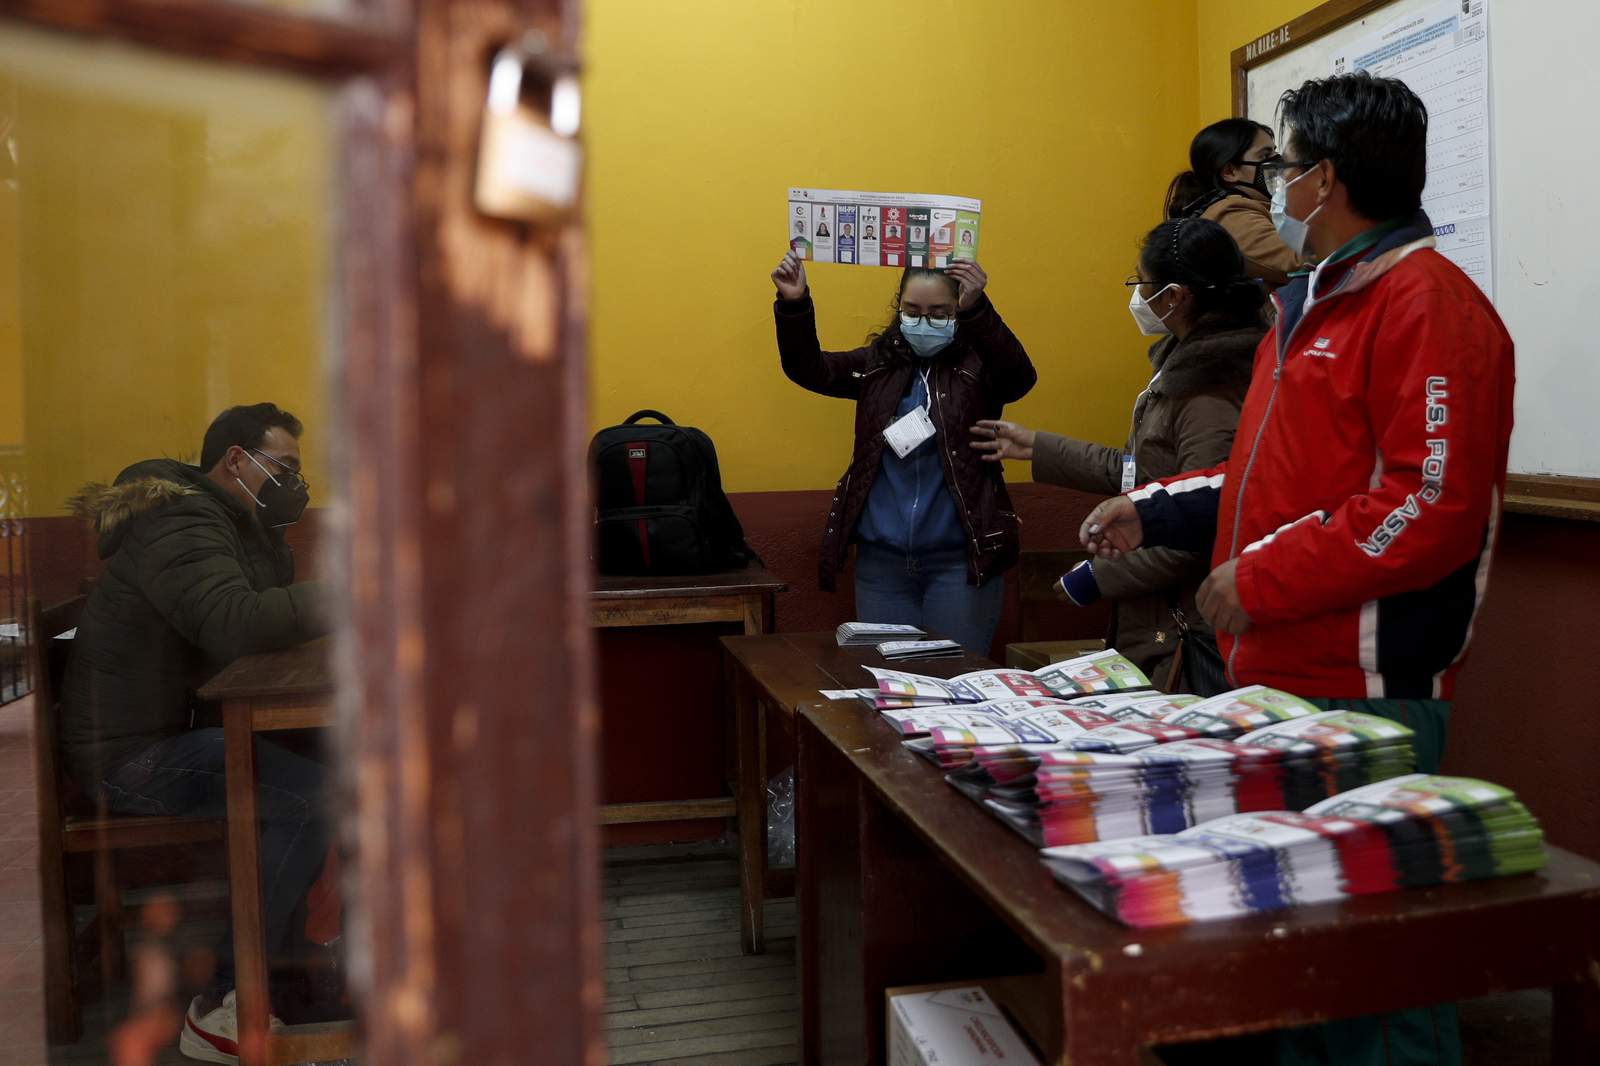 A tense Bolivia awaits voting results in redo amid pandemic